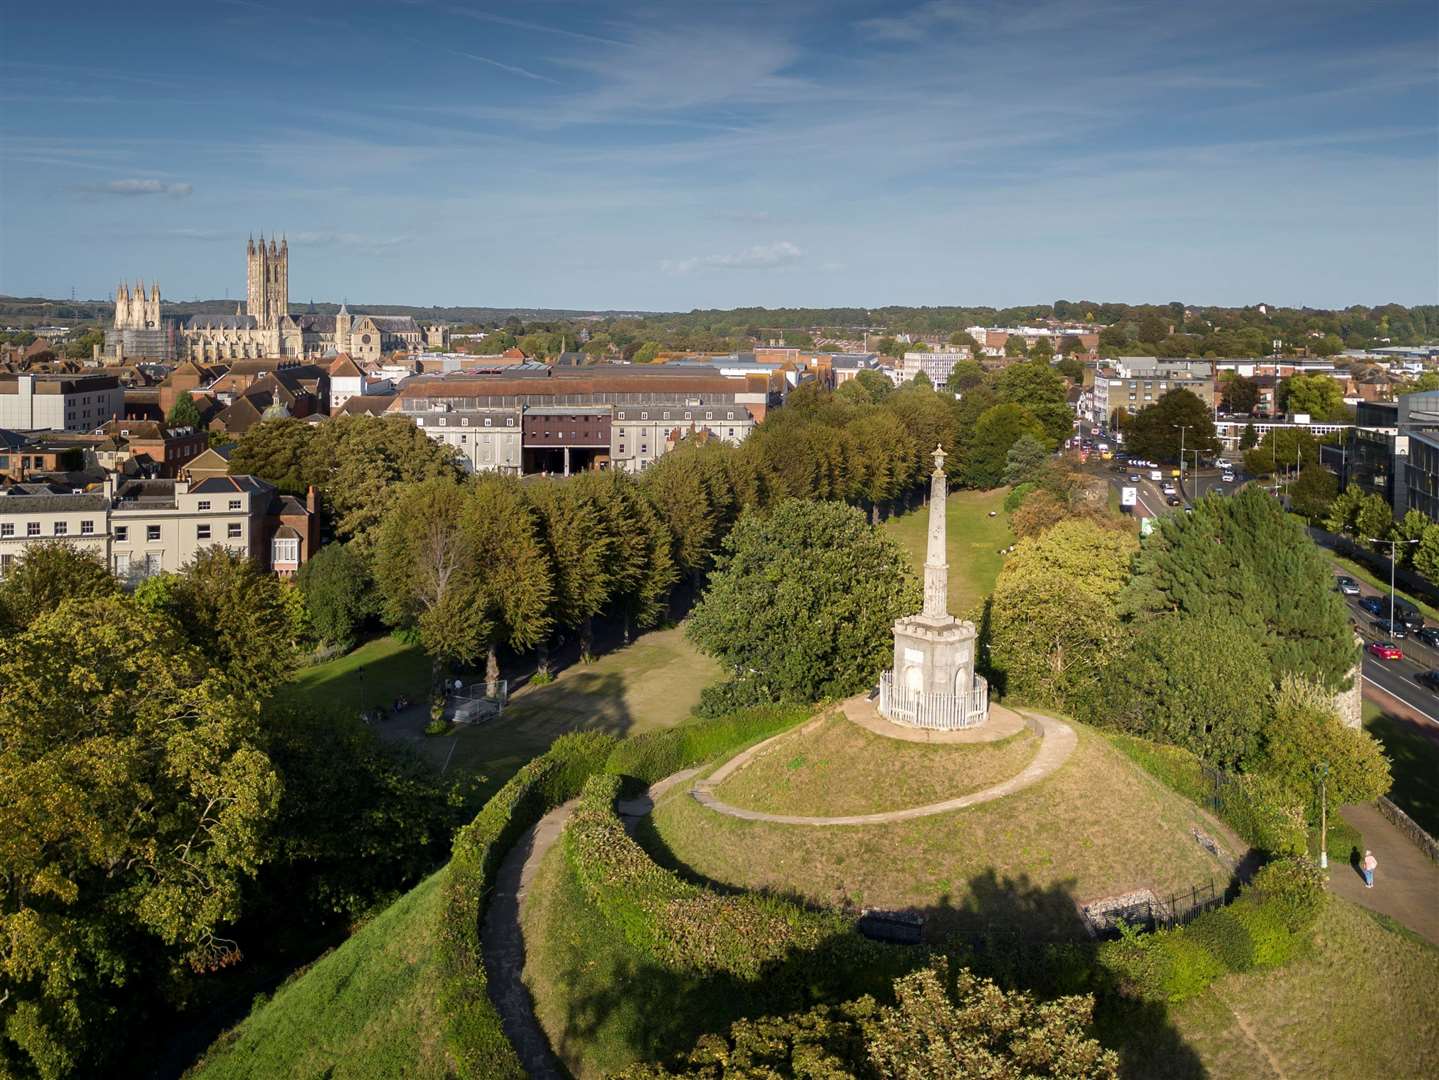 The Dane John Mound in the city centre’s Dane John Gardens has been added to the heritage at risk registerPicture: Historic England